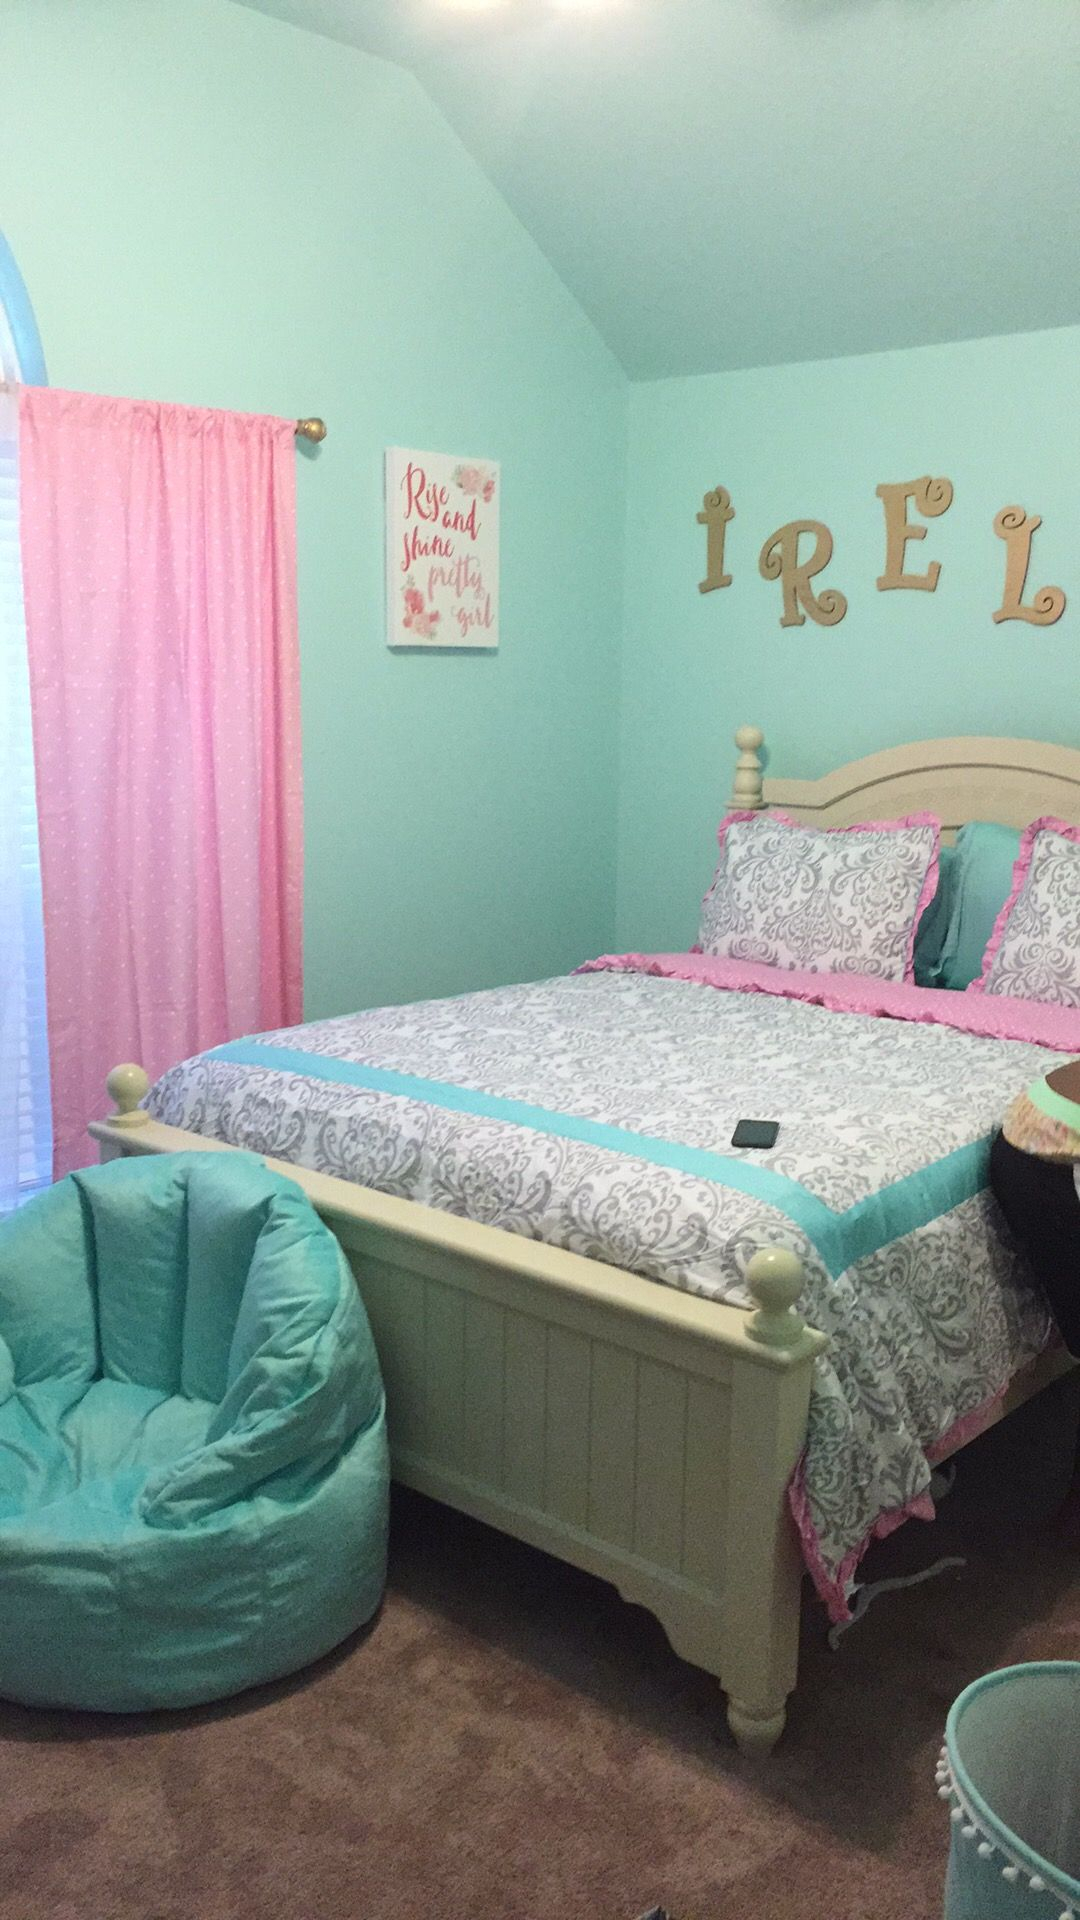 Sherwin Williams Tame Teal Girls Bedroom Paint Ideas In 2019 within dimensions 1080 X 1920